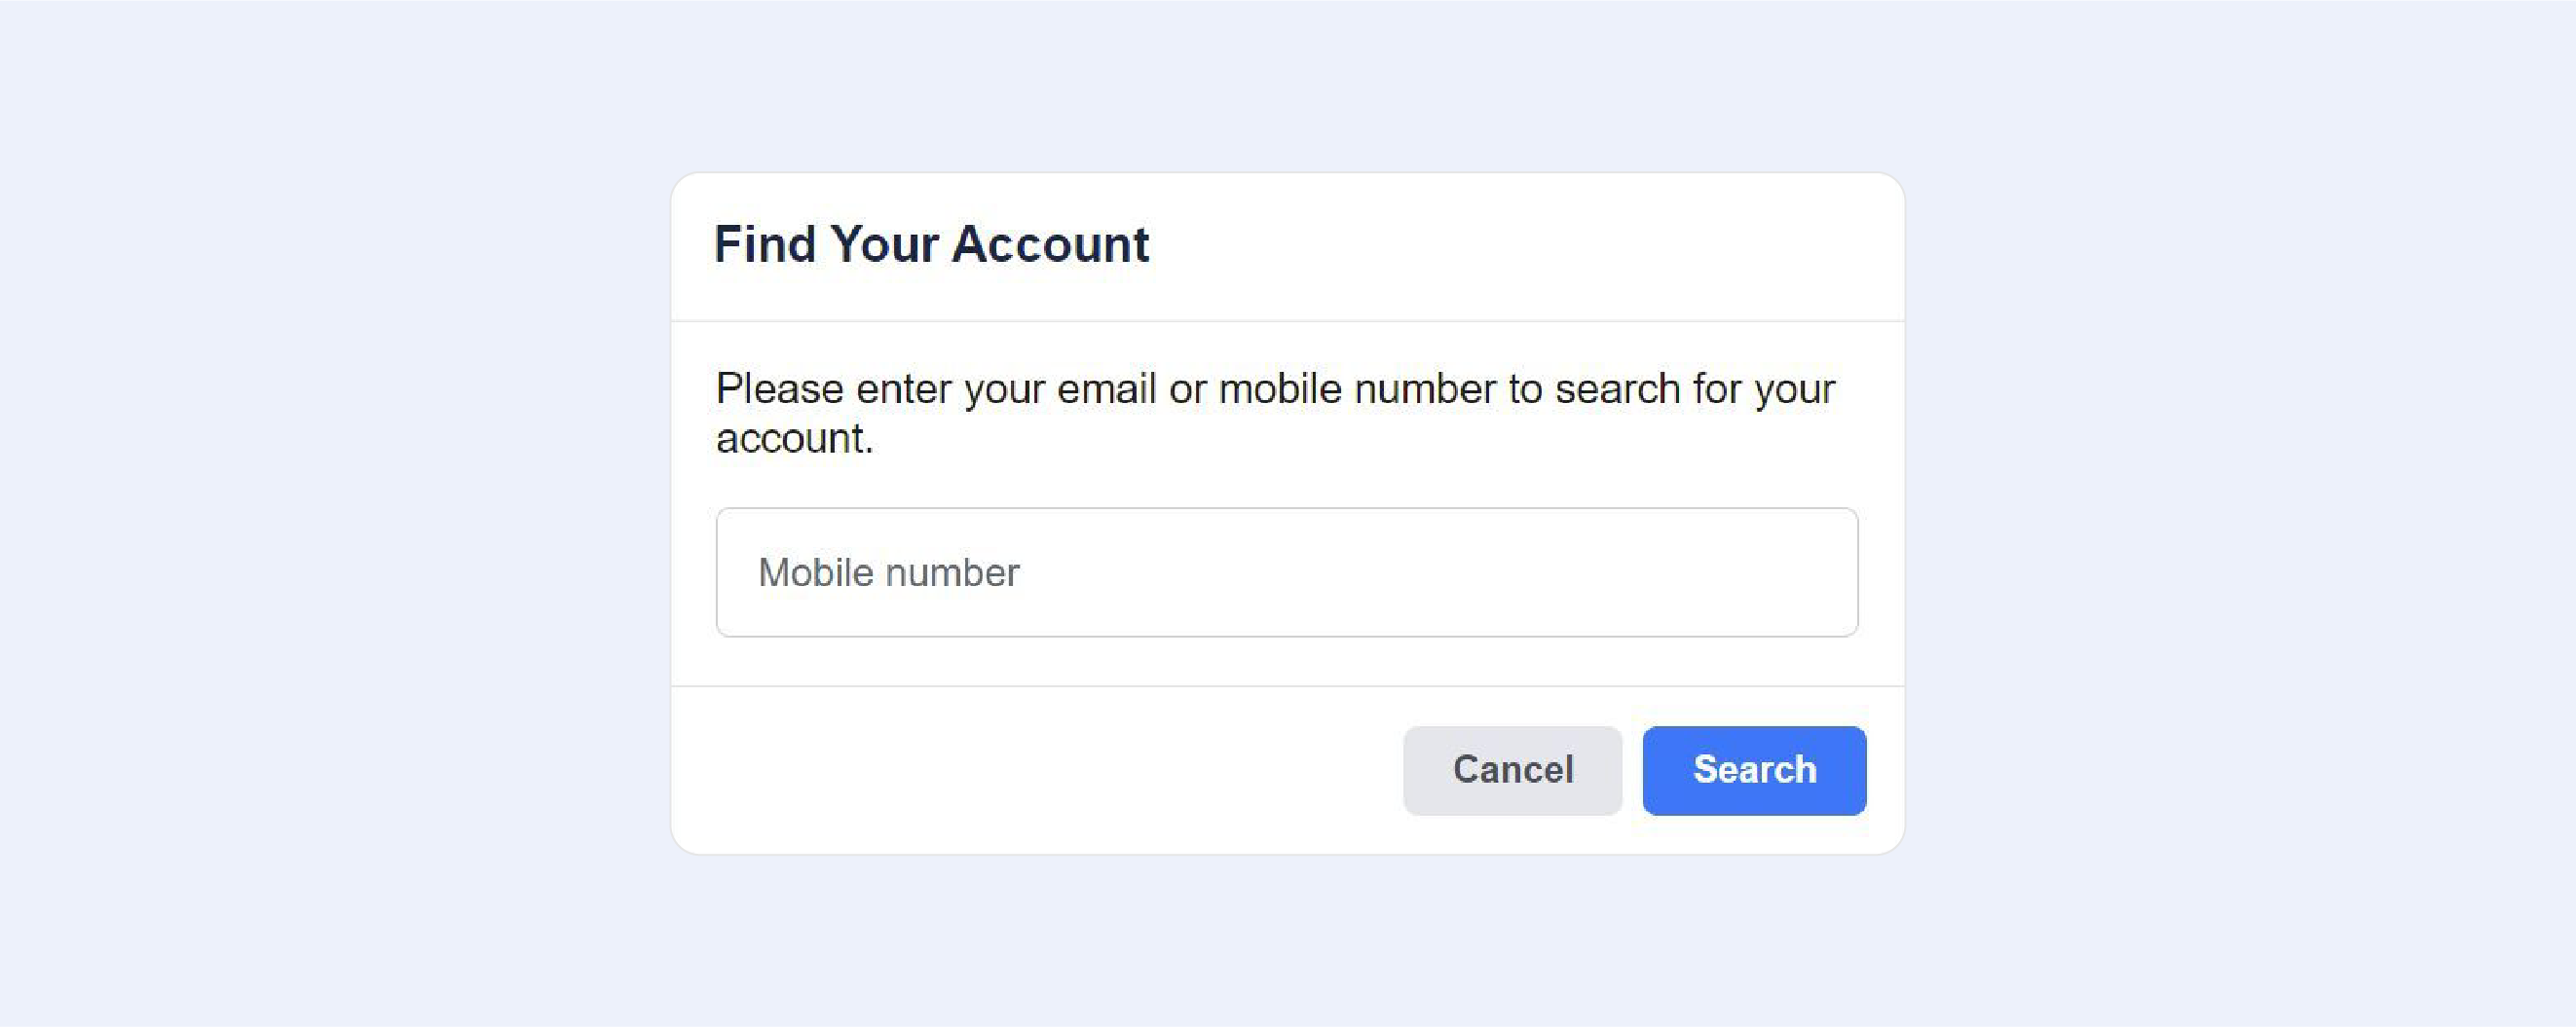 Facebook sign up: get a Facebook account or make a new profile